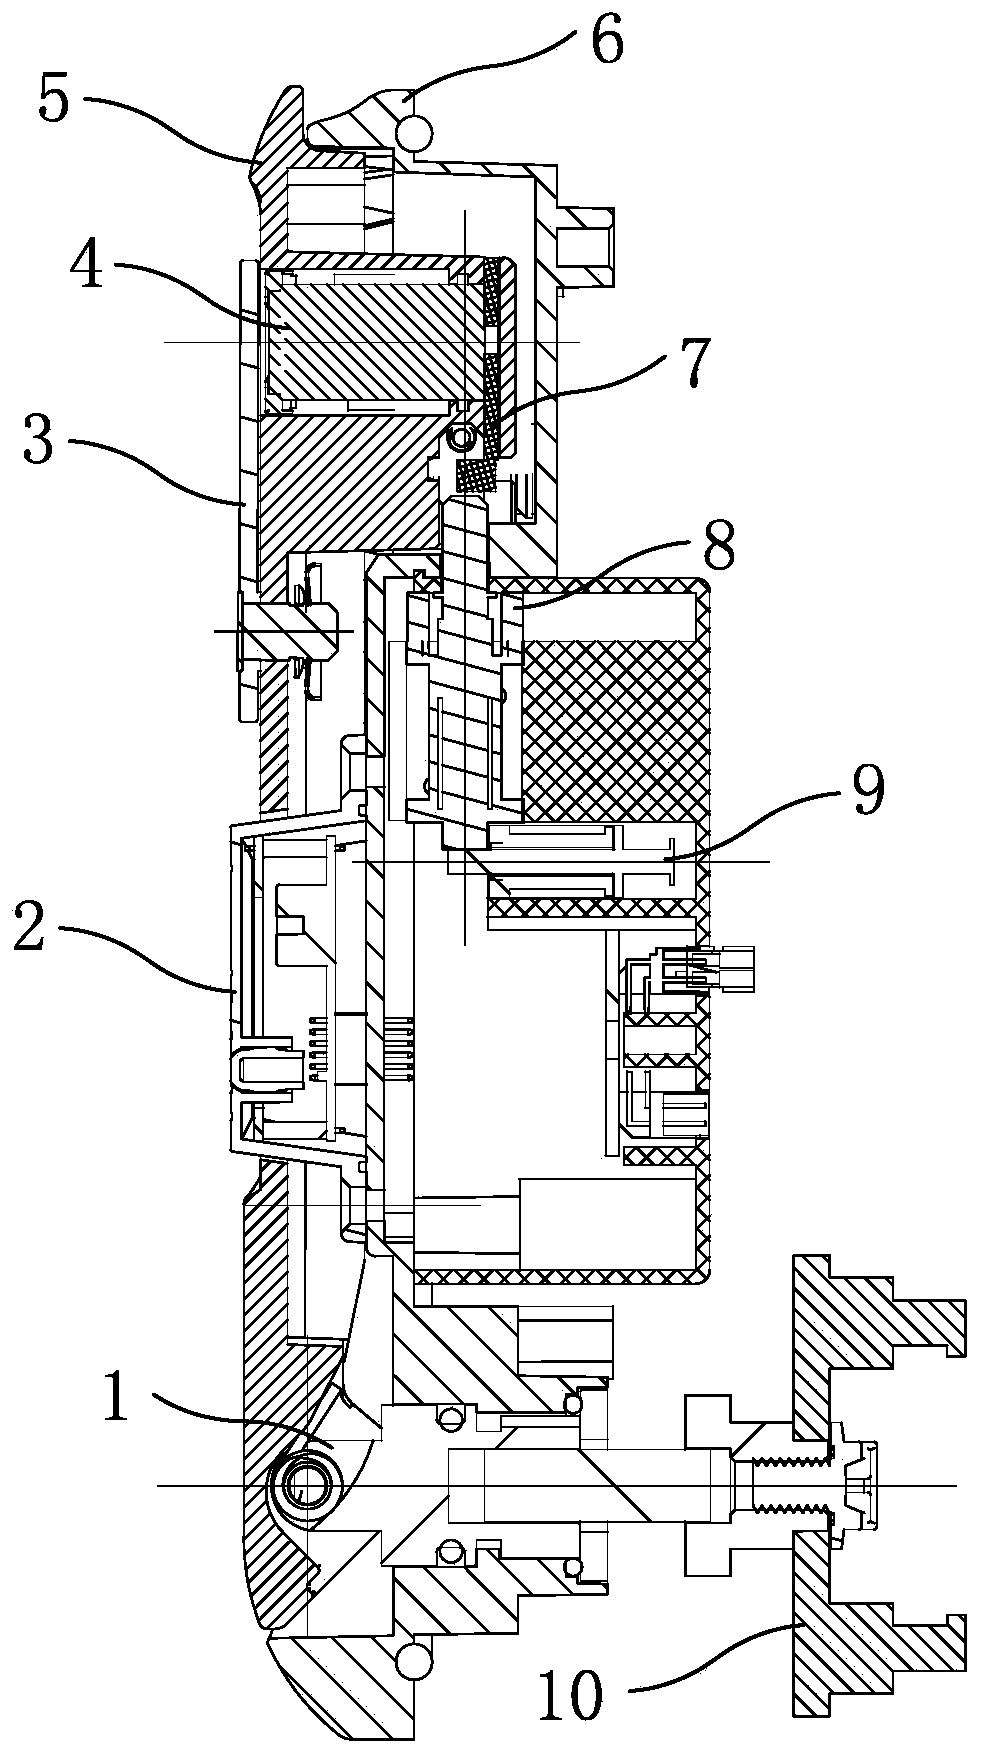 Angled wedge electronic lock and method of use thereof